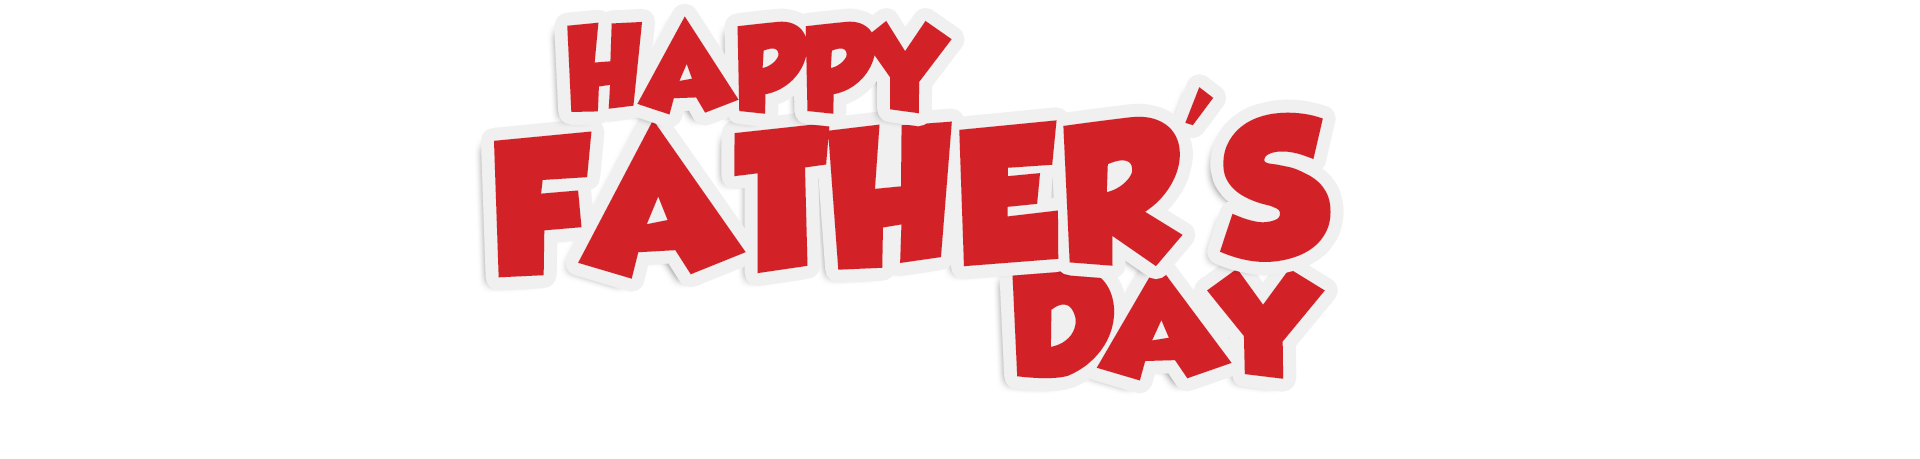 . Hdpng.com Happy Fathers Day.png Hdpng.com  - Fathers Day, Transparent background PNG HD thumbnail